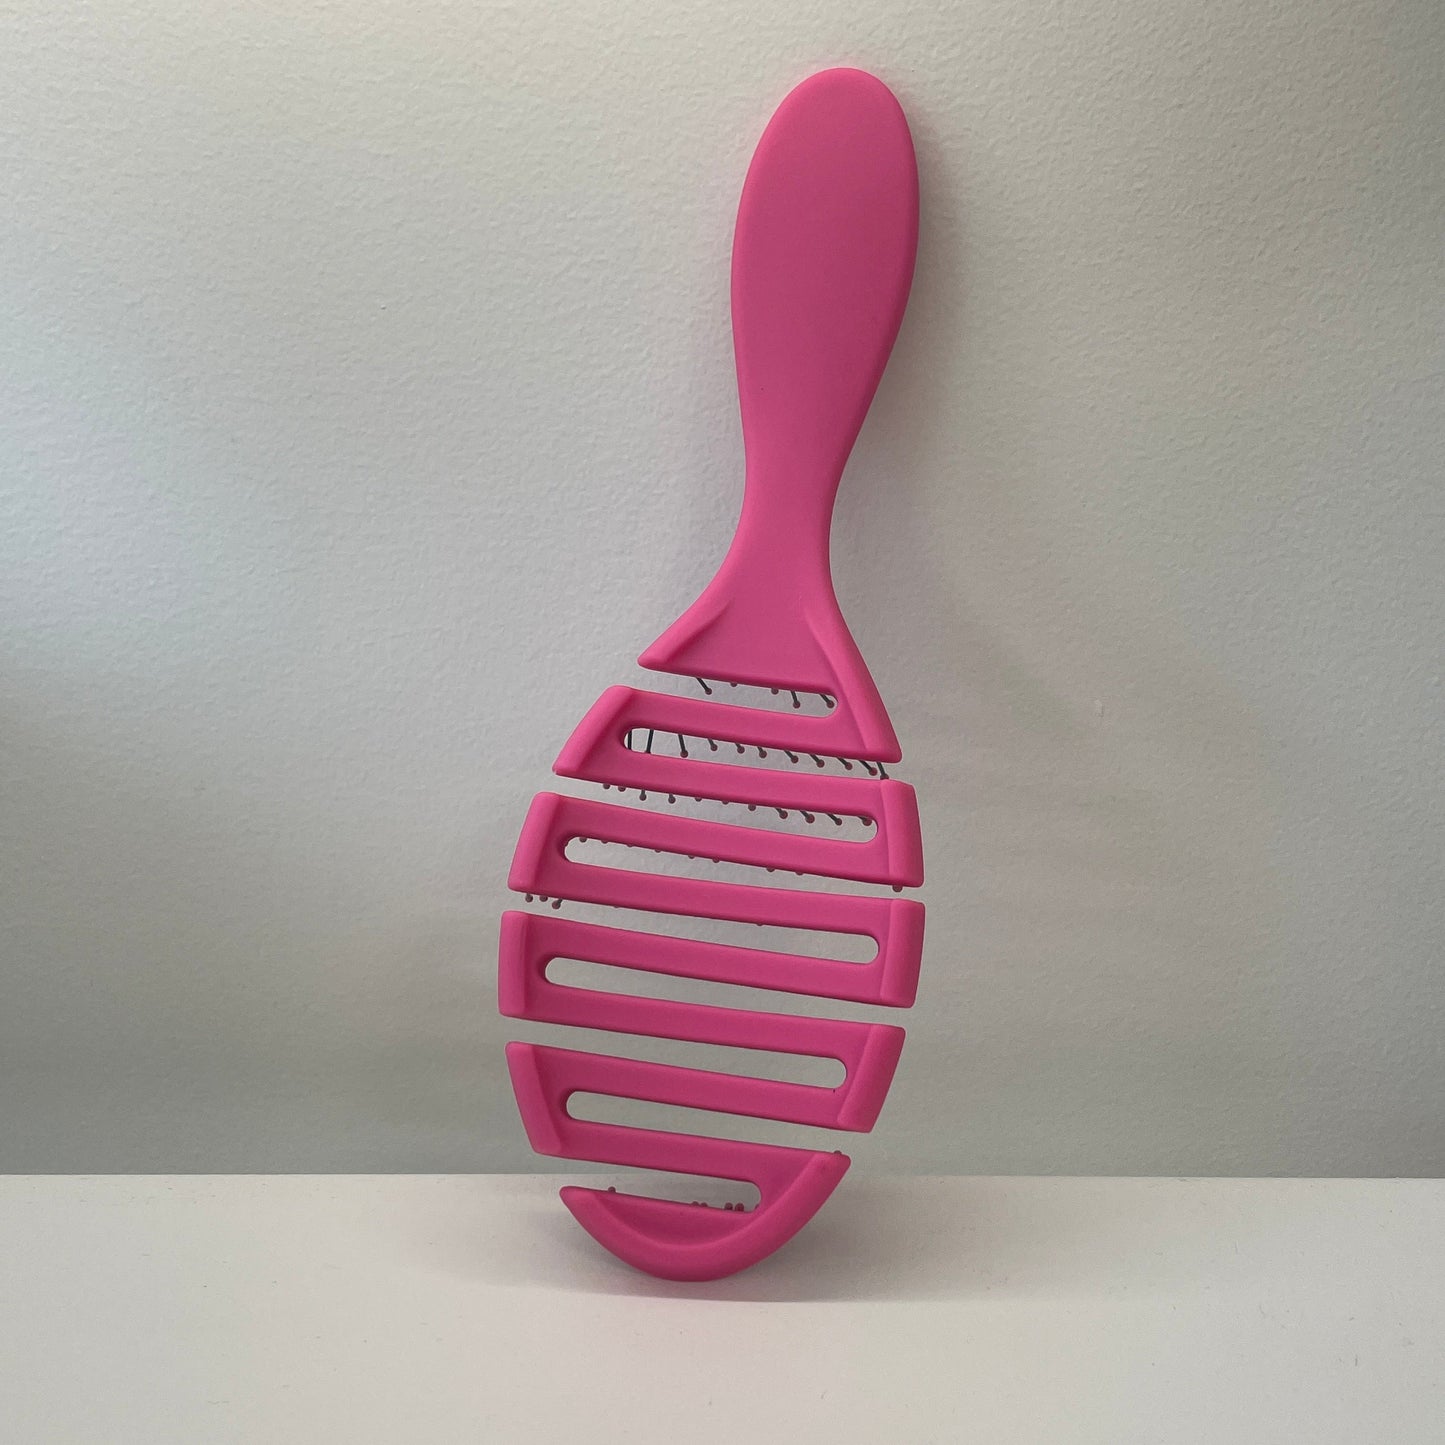 Buy Detangling Brush pink oval - House Of Hair New Zealand Haircare